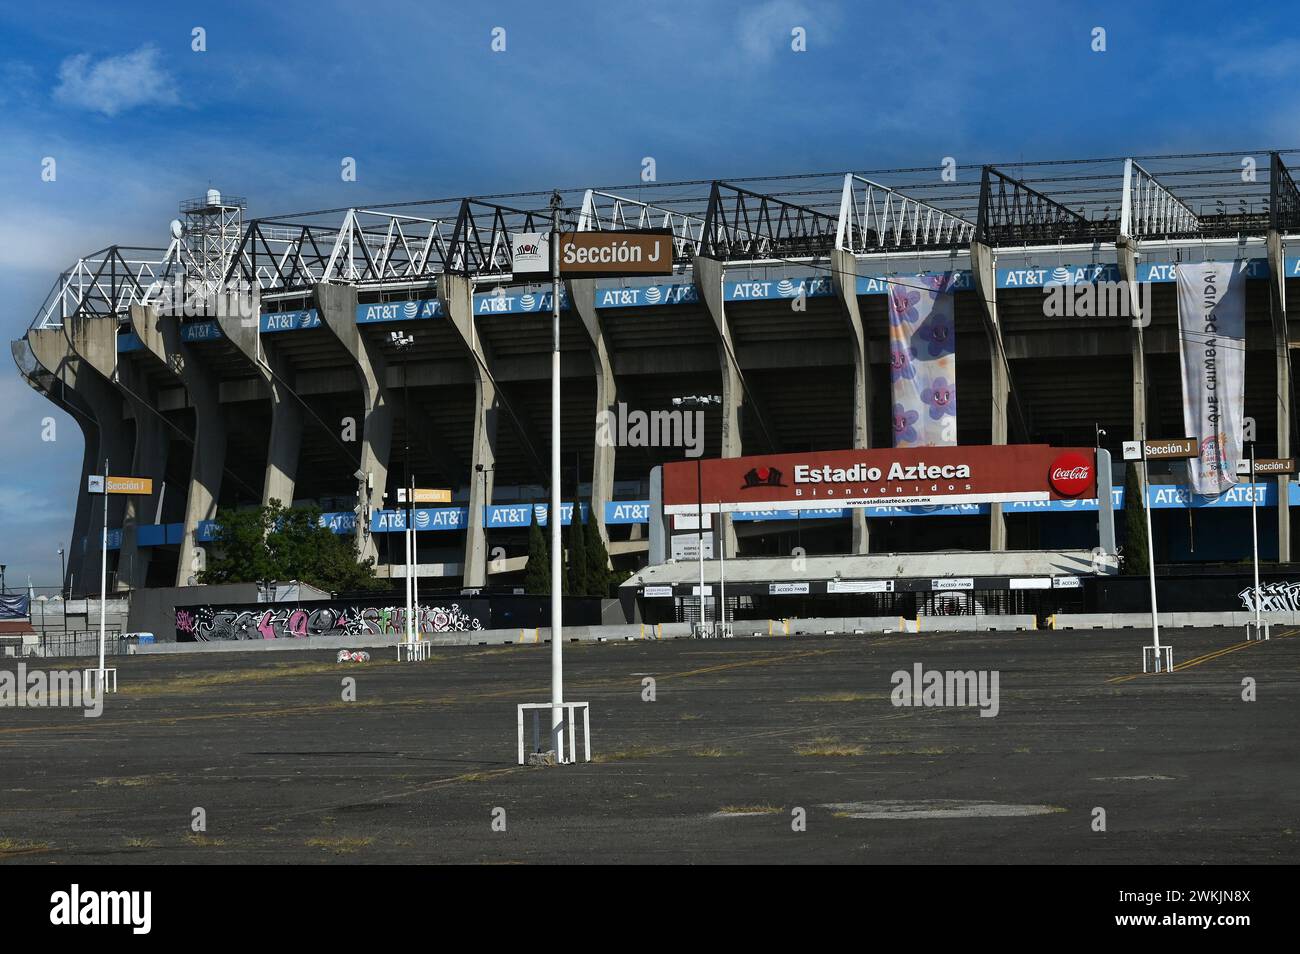 Estadio Azteca, Azteca Stadium, home of the Club America football club and venue for the opening match of the 2026 FIFA World Cup Stock Photo